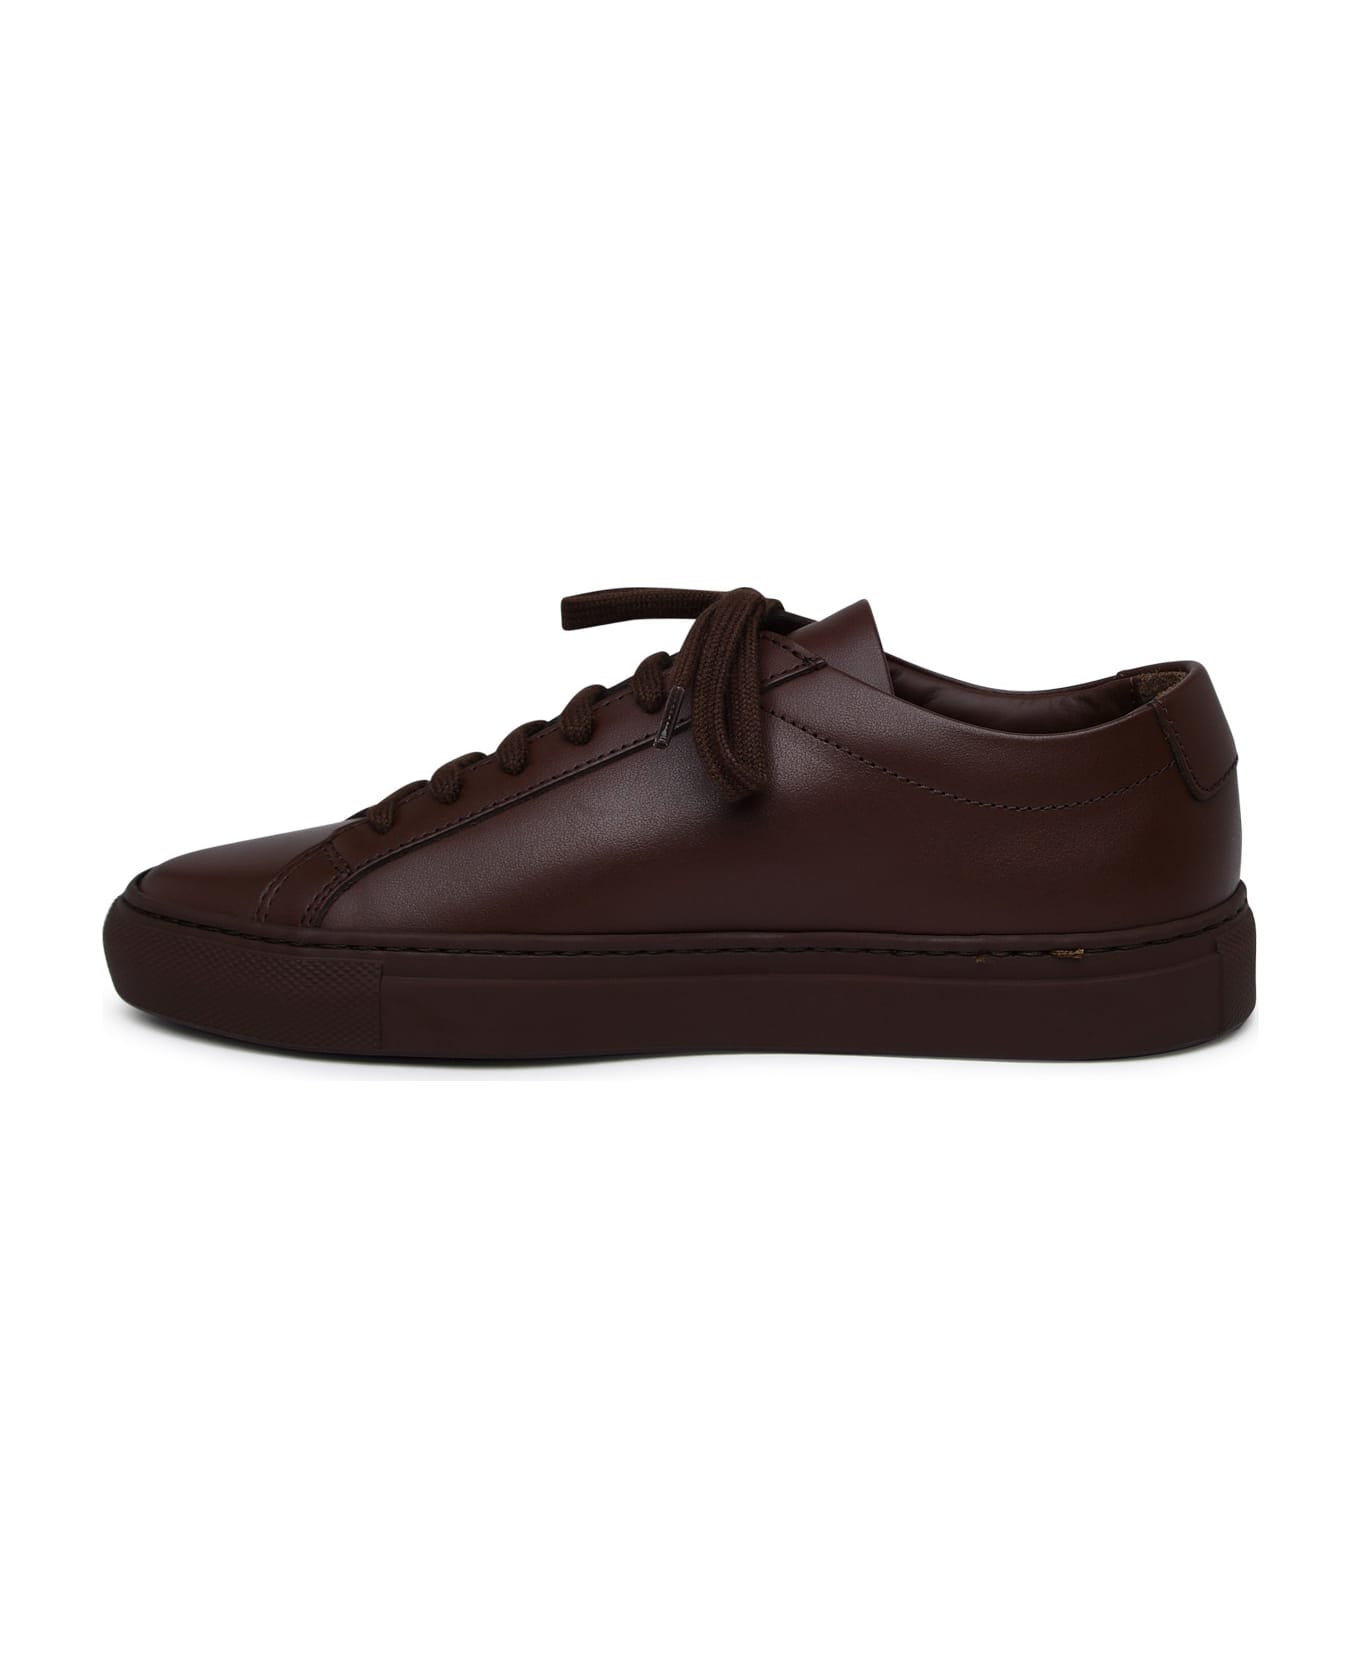 Common Projects Achilles Leather Sneakers - Brown スニーカー